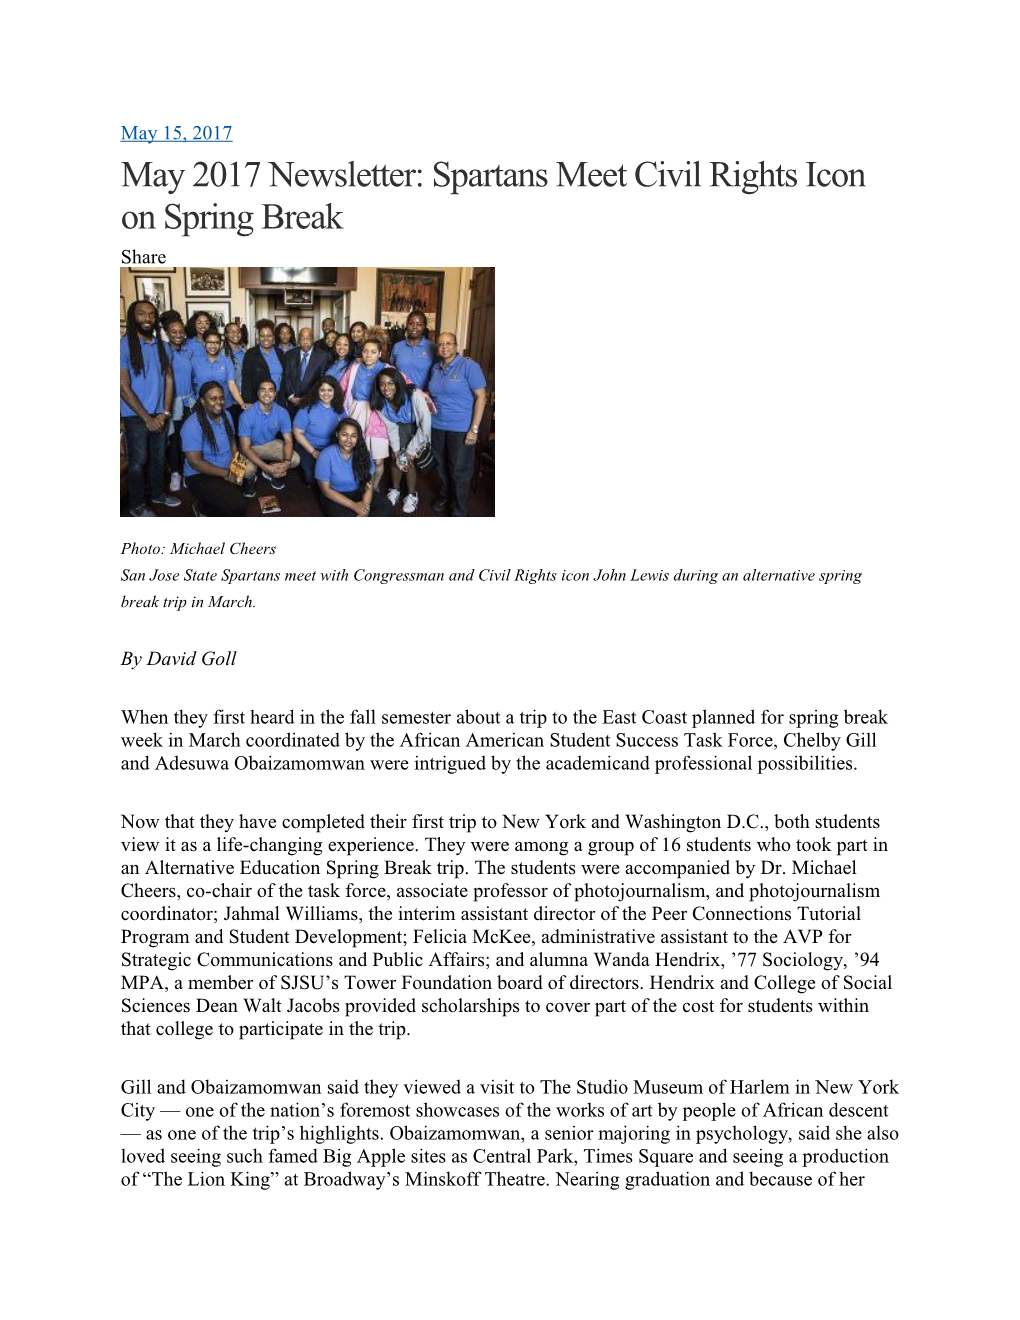 May 2017 Newsletter: Spartans Meet Civil Rights Icon on Spring Break